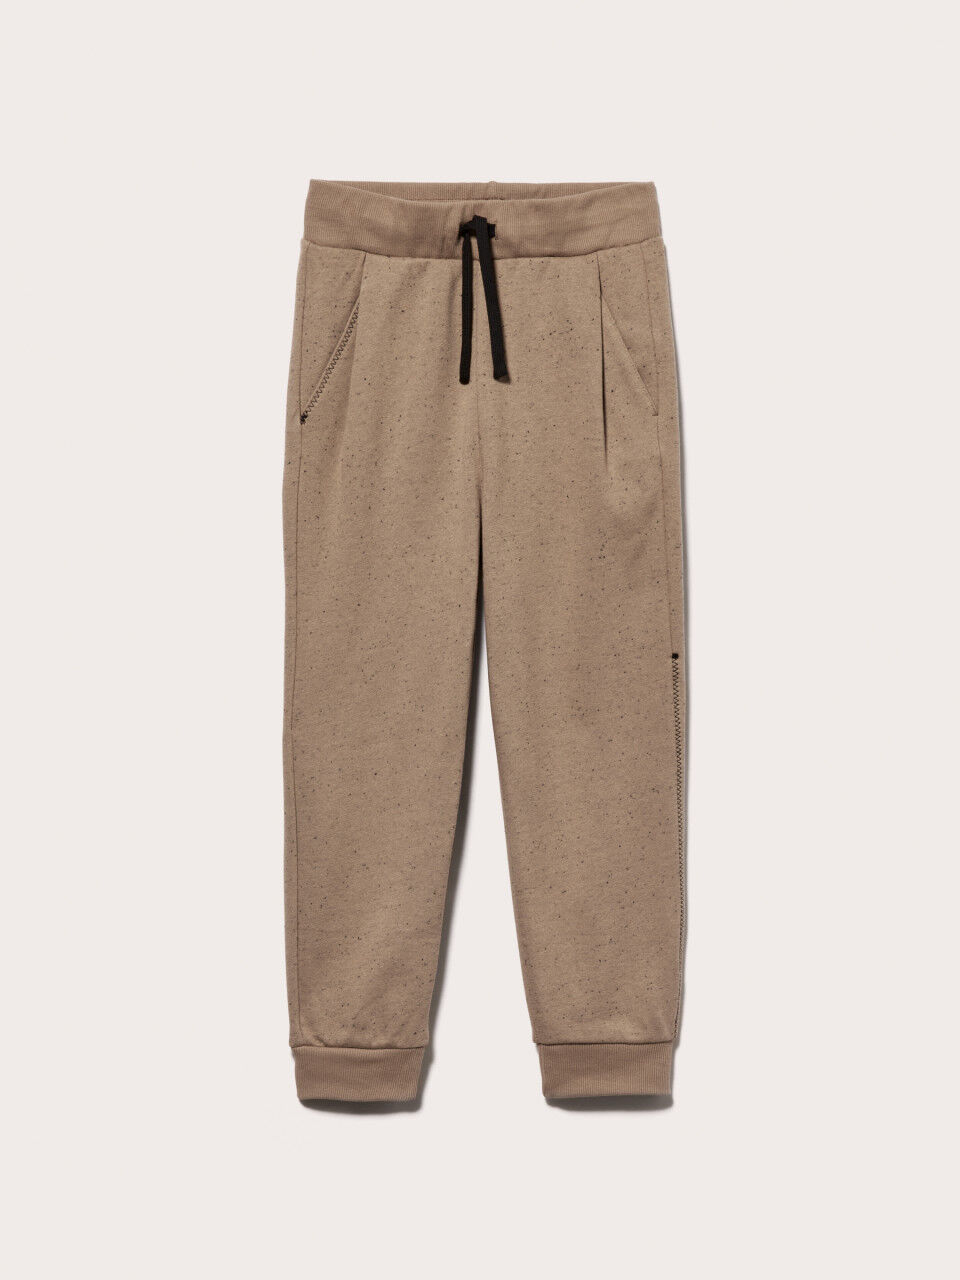 Oversized fit joggers